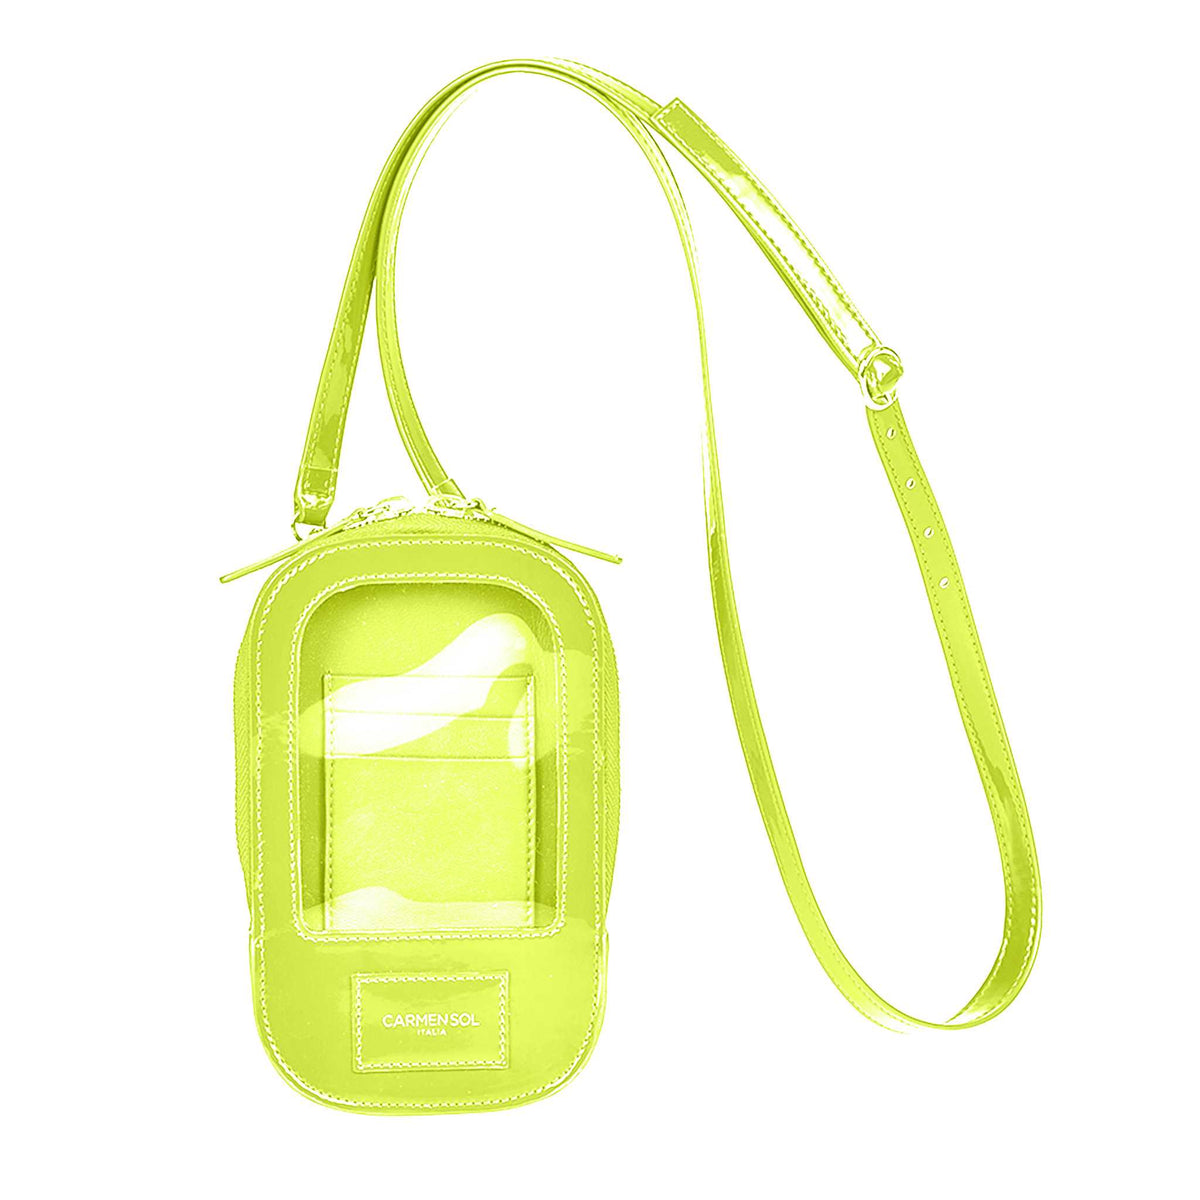 Neon yellow Gio smartphone holder to keep your cards and phone safe